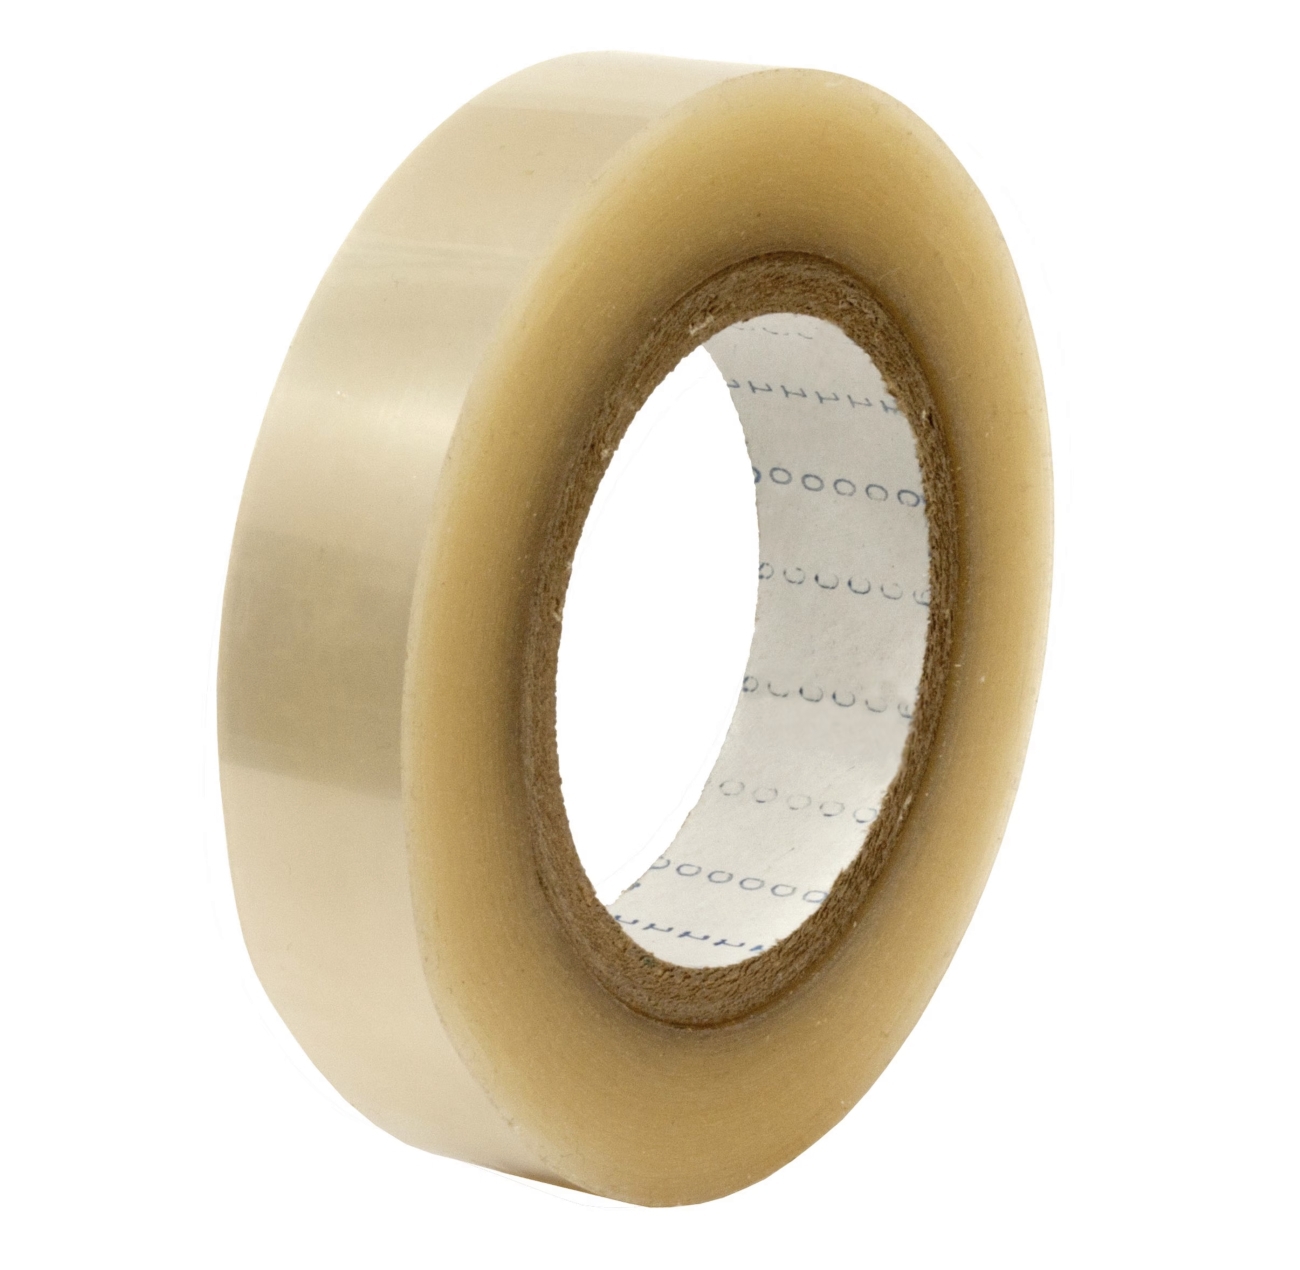 S-K-S dubbelzijdige kleefband met polyester drager 960, transparant, 6 mm x 66 m, siliconen kleefband, 0,085 mm